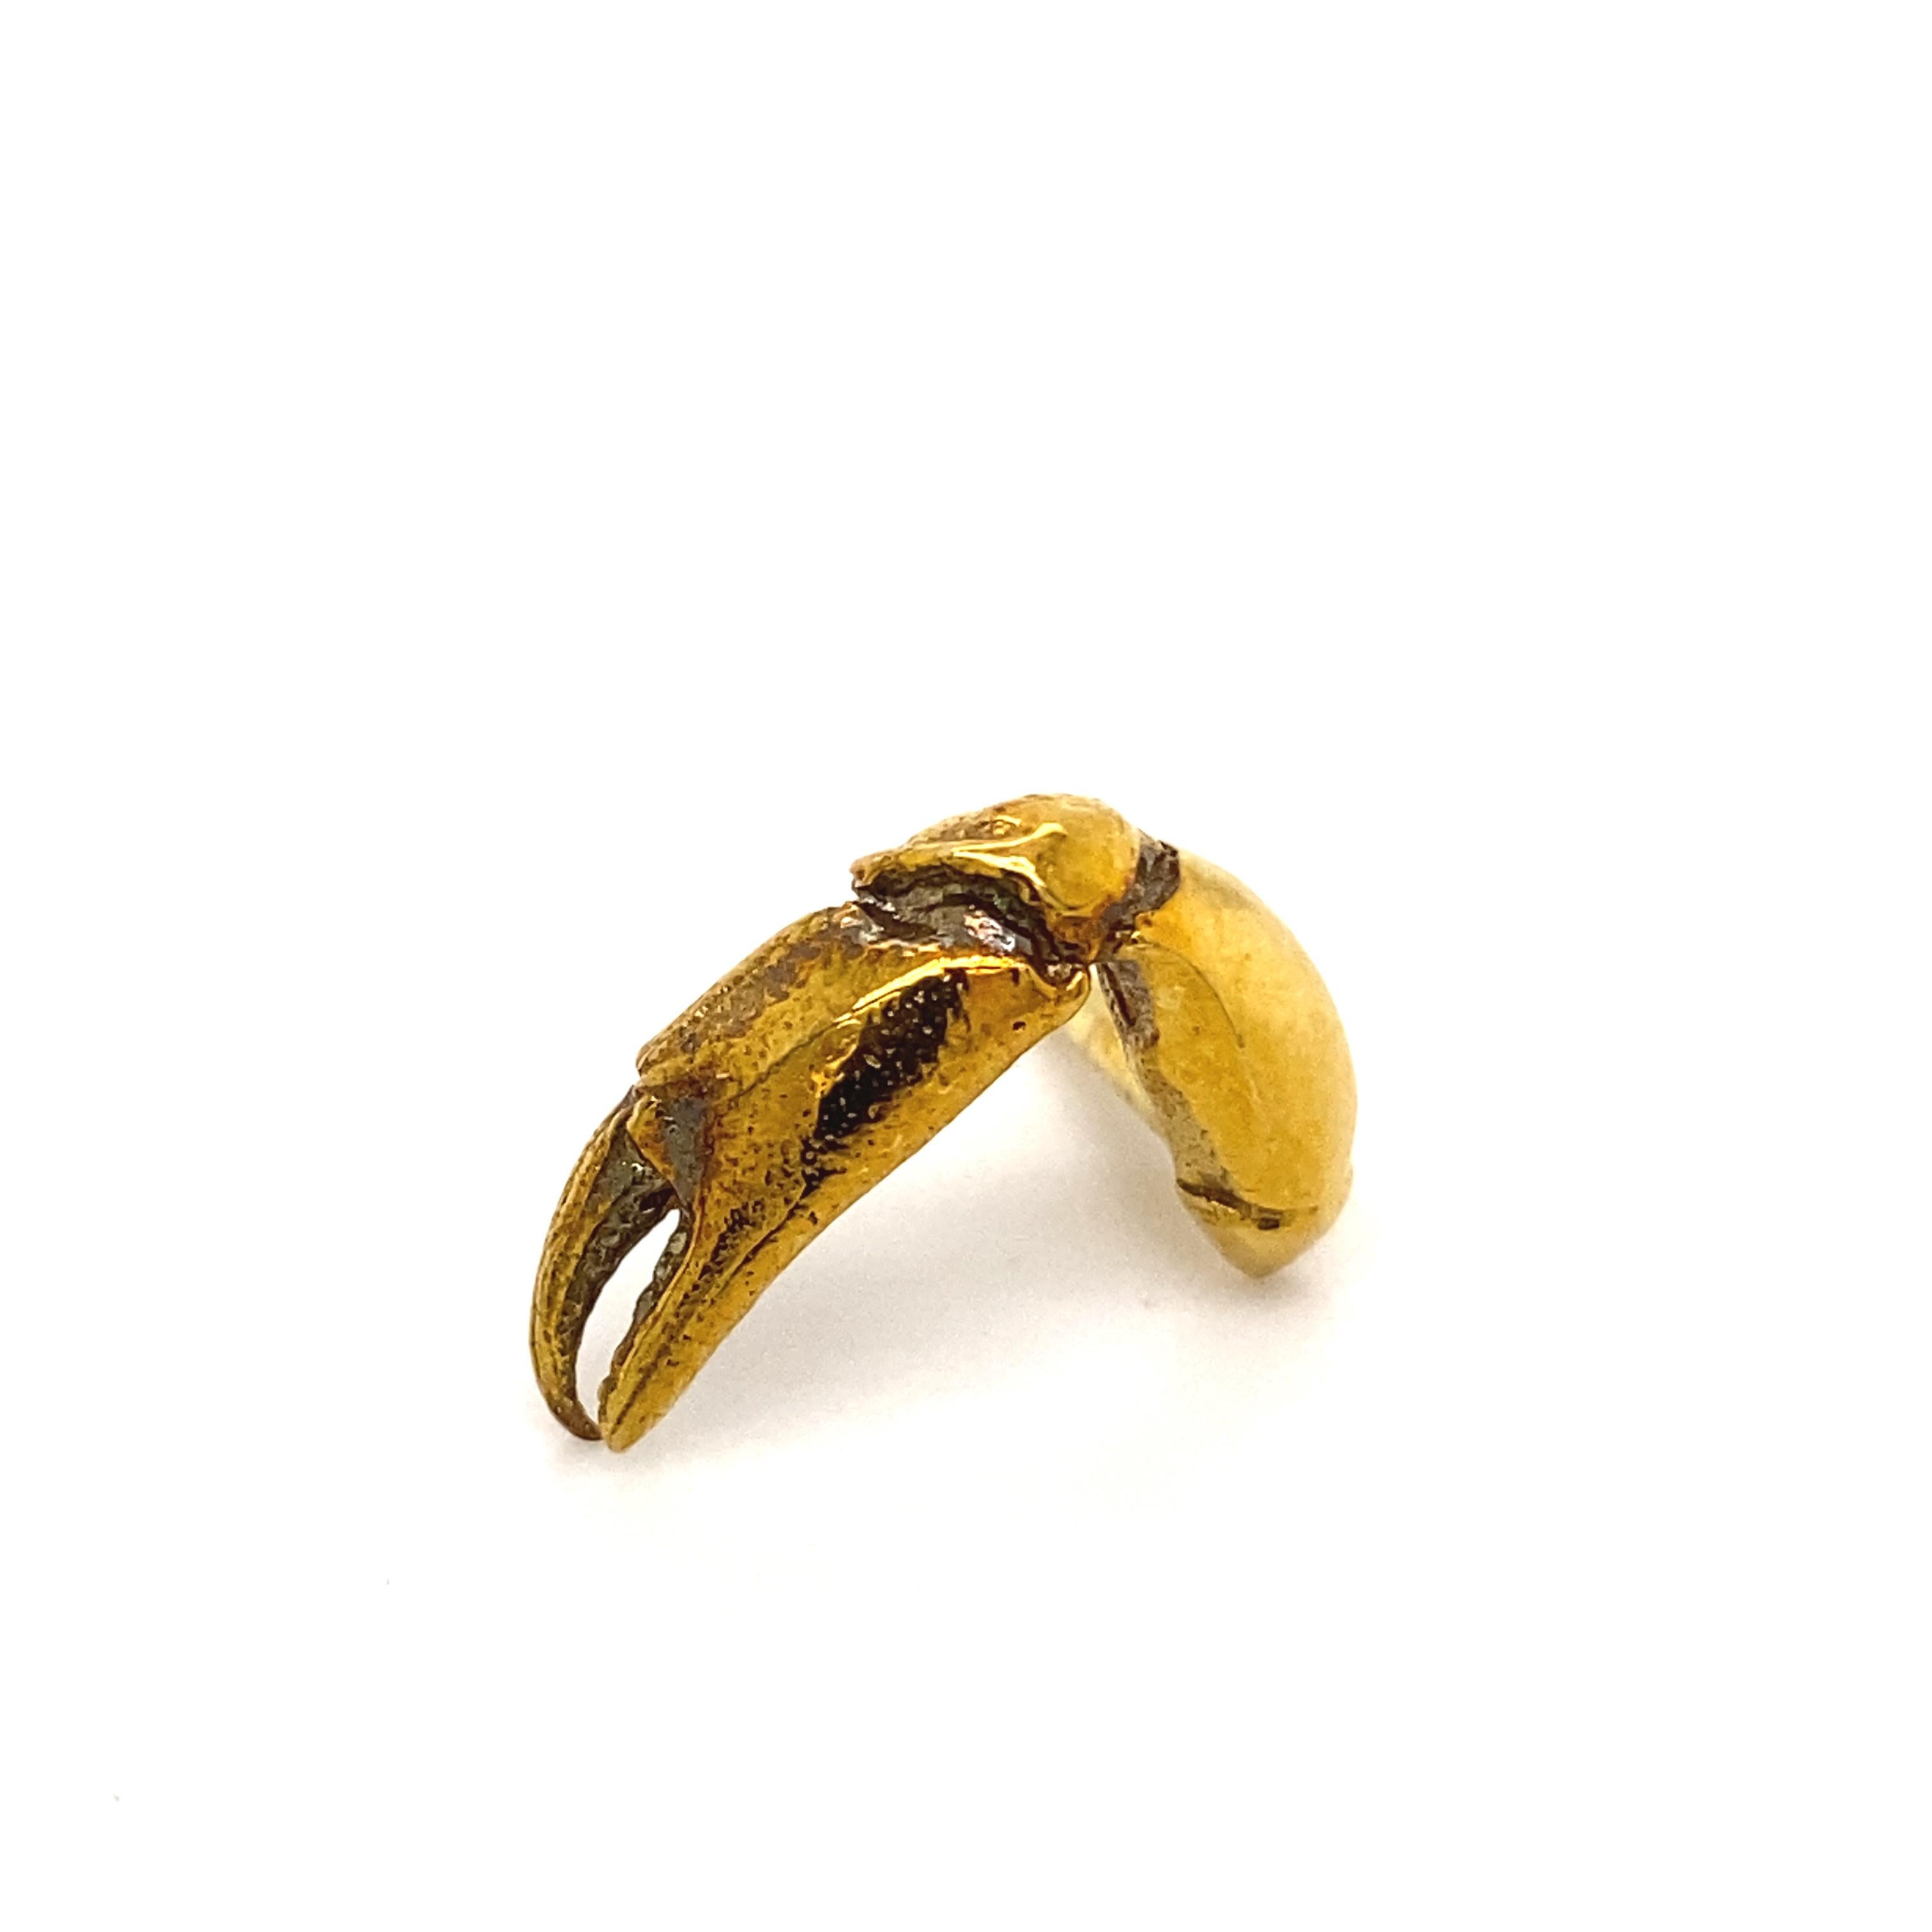 A Tiffany & Co 14 karat yellow gold lobster caw lapel pin, circa 1950.

This sweet lapel pin depicts an an upturned lobster claw which is beautifully hand detailed to show the crevices within the claw.

Fastened with a base metal non original pin